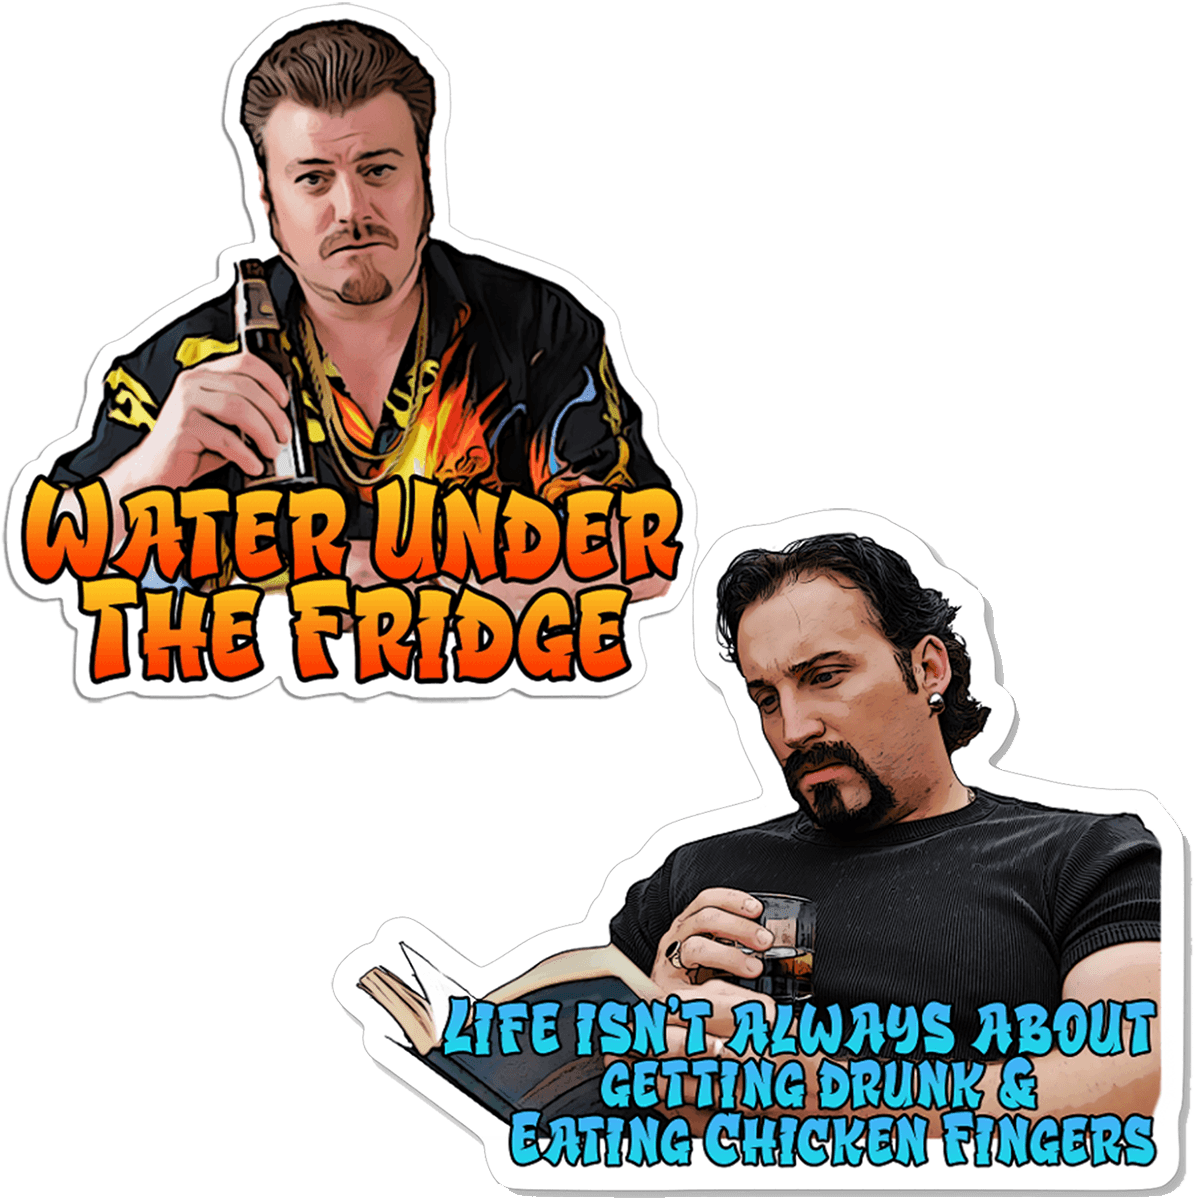 Trailer Park Boys® (2 Pack Stickers) Featuring Julian and Ricky | Officially Licensed Trailer Park Boys Sticker | Julian Sticker - Ottos Grotto :: Stickers For Your Stuff